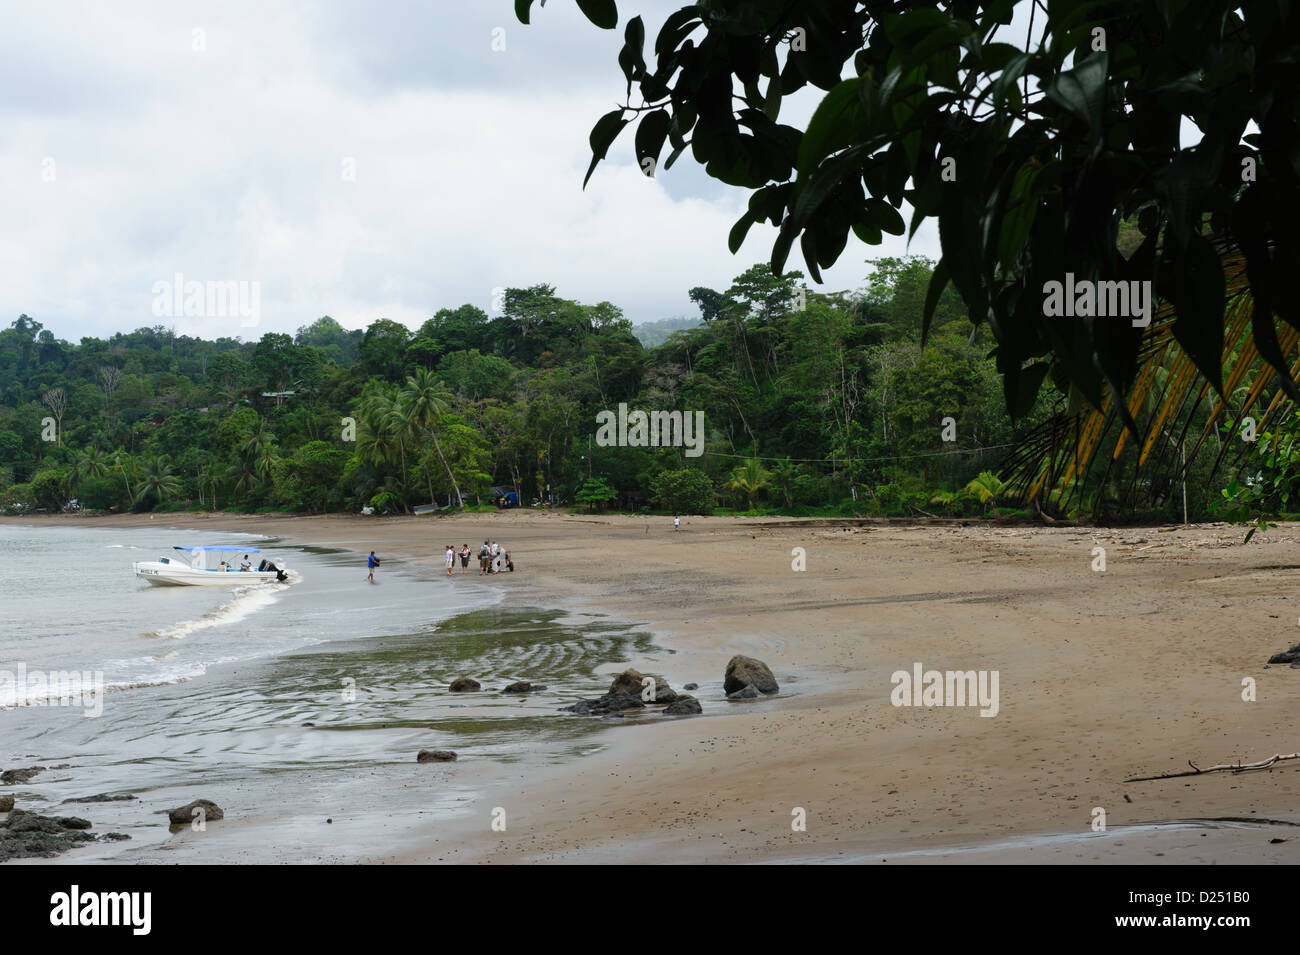 Tourists arriving by boat on the beach of Bahia Drake. Costa Rica Stock Photo